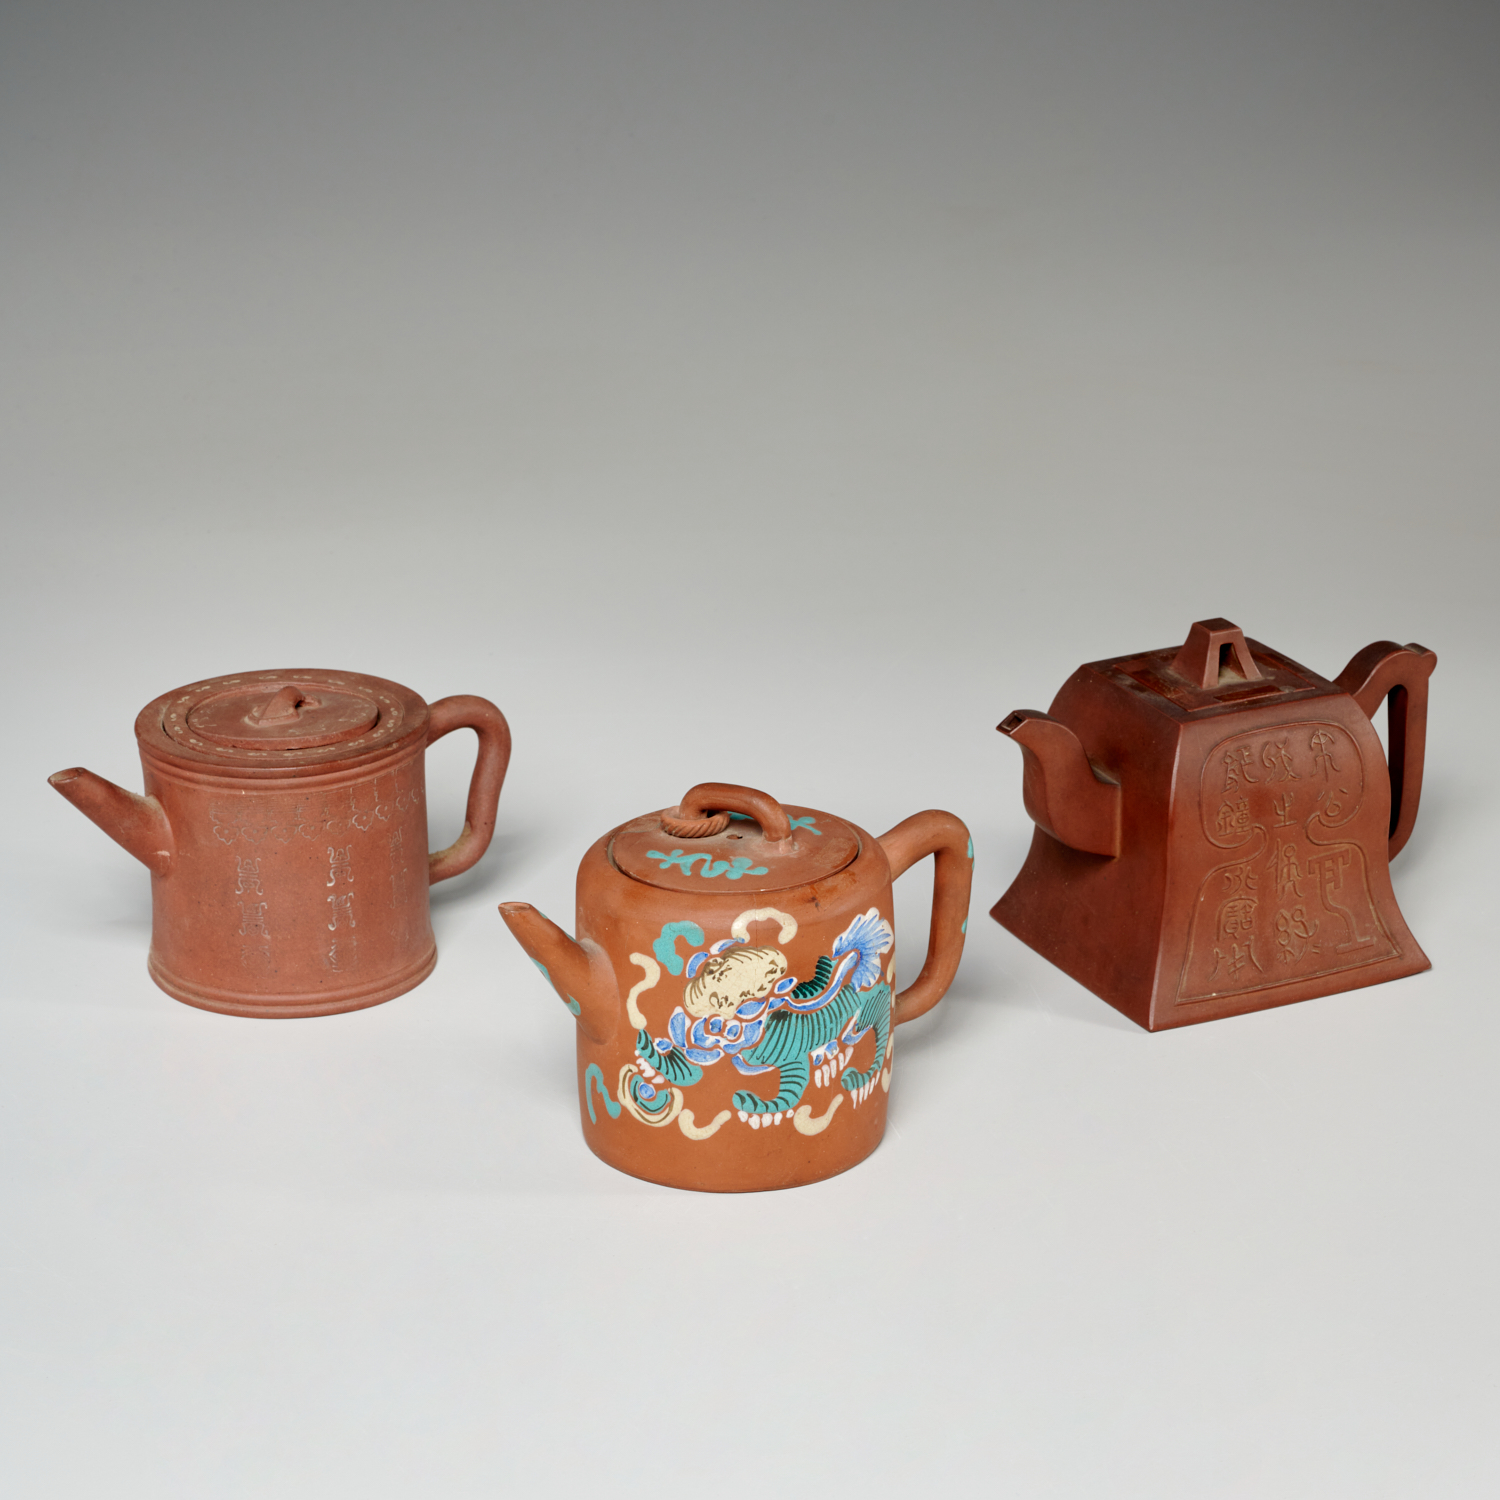  3 CHINESE YIXING POTTERY TEAPOTS 3611ae